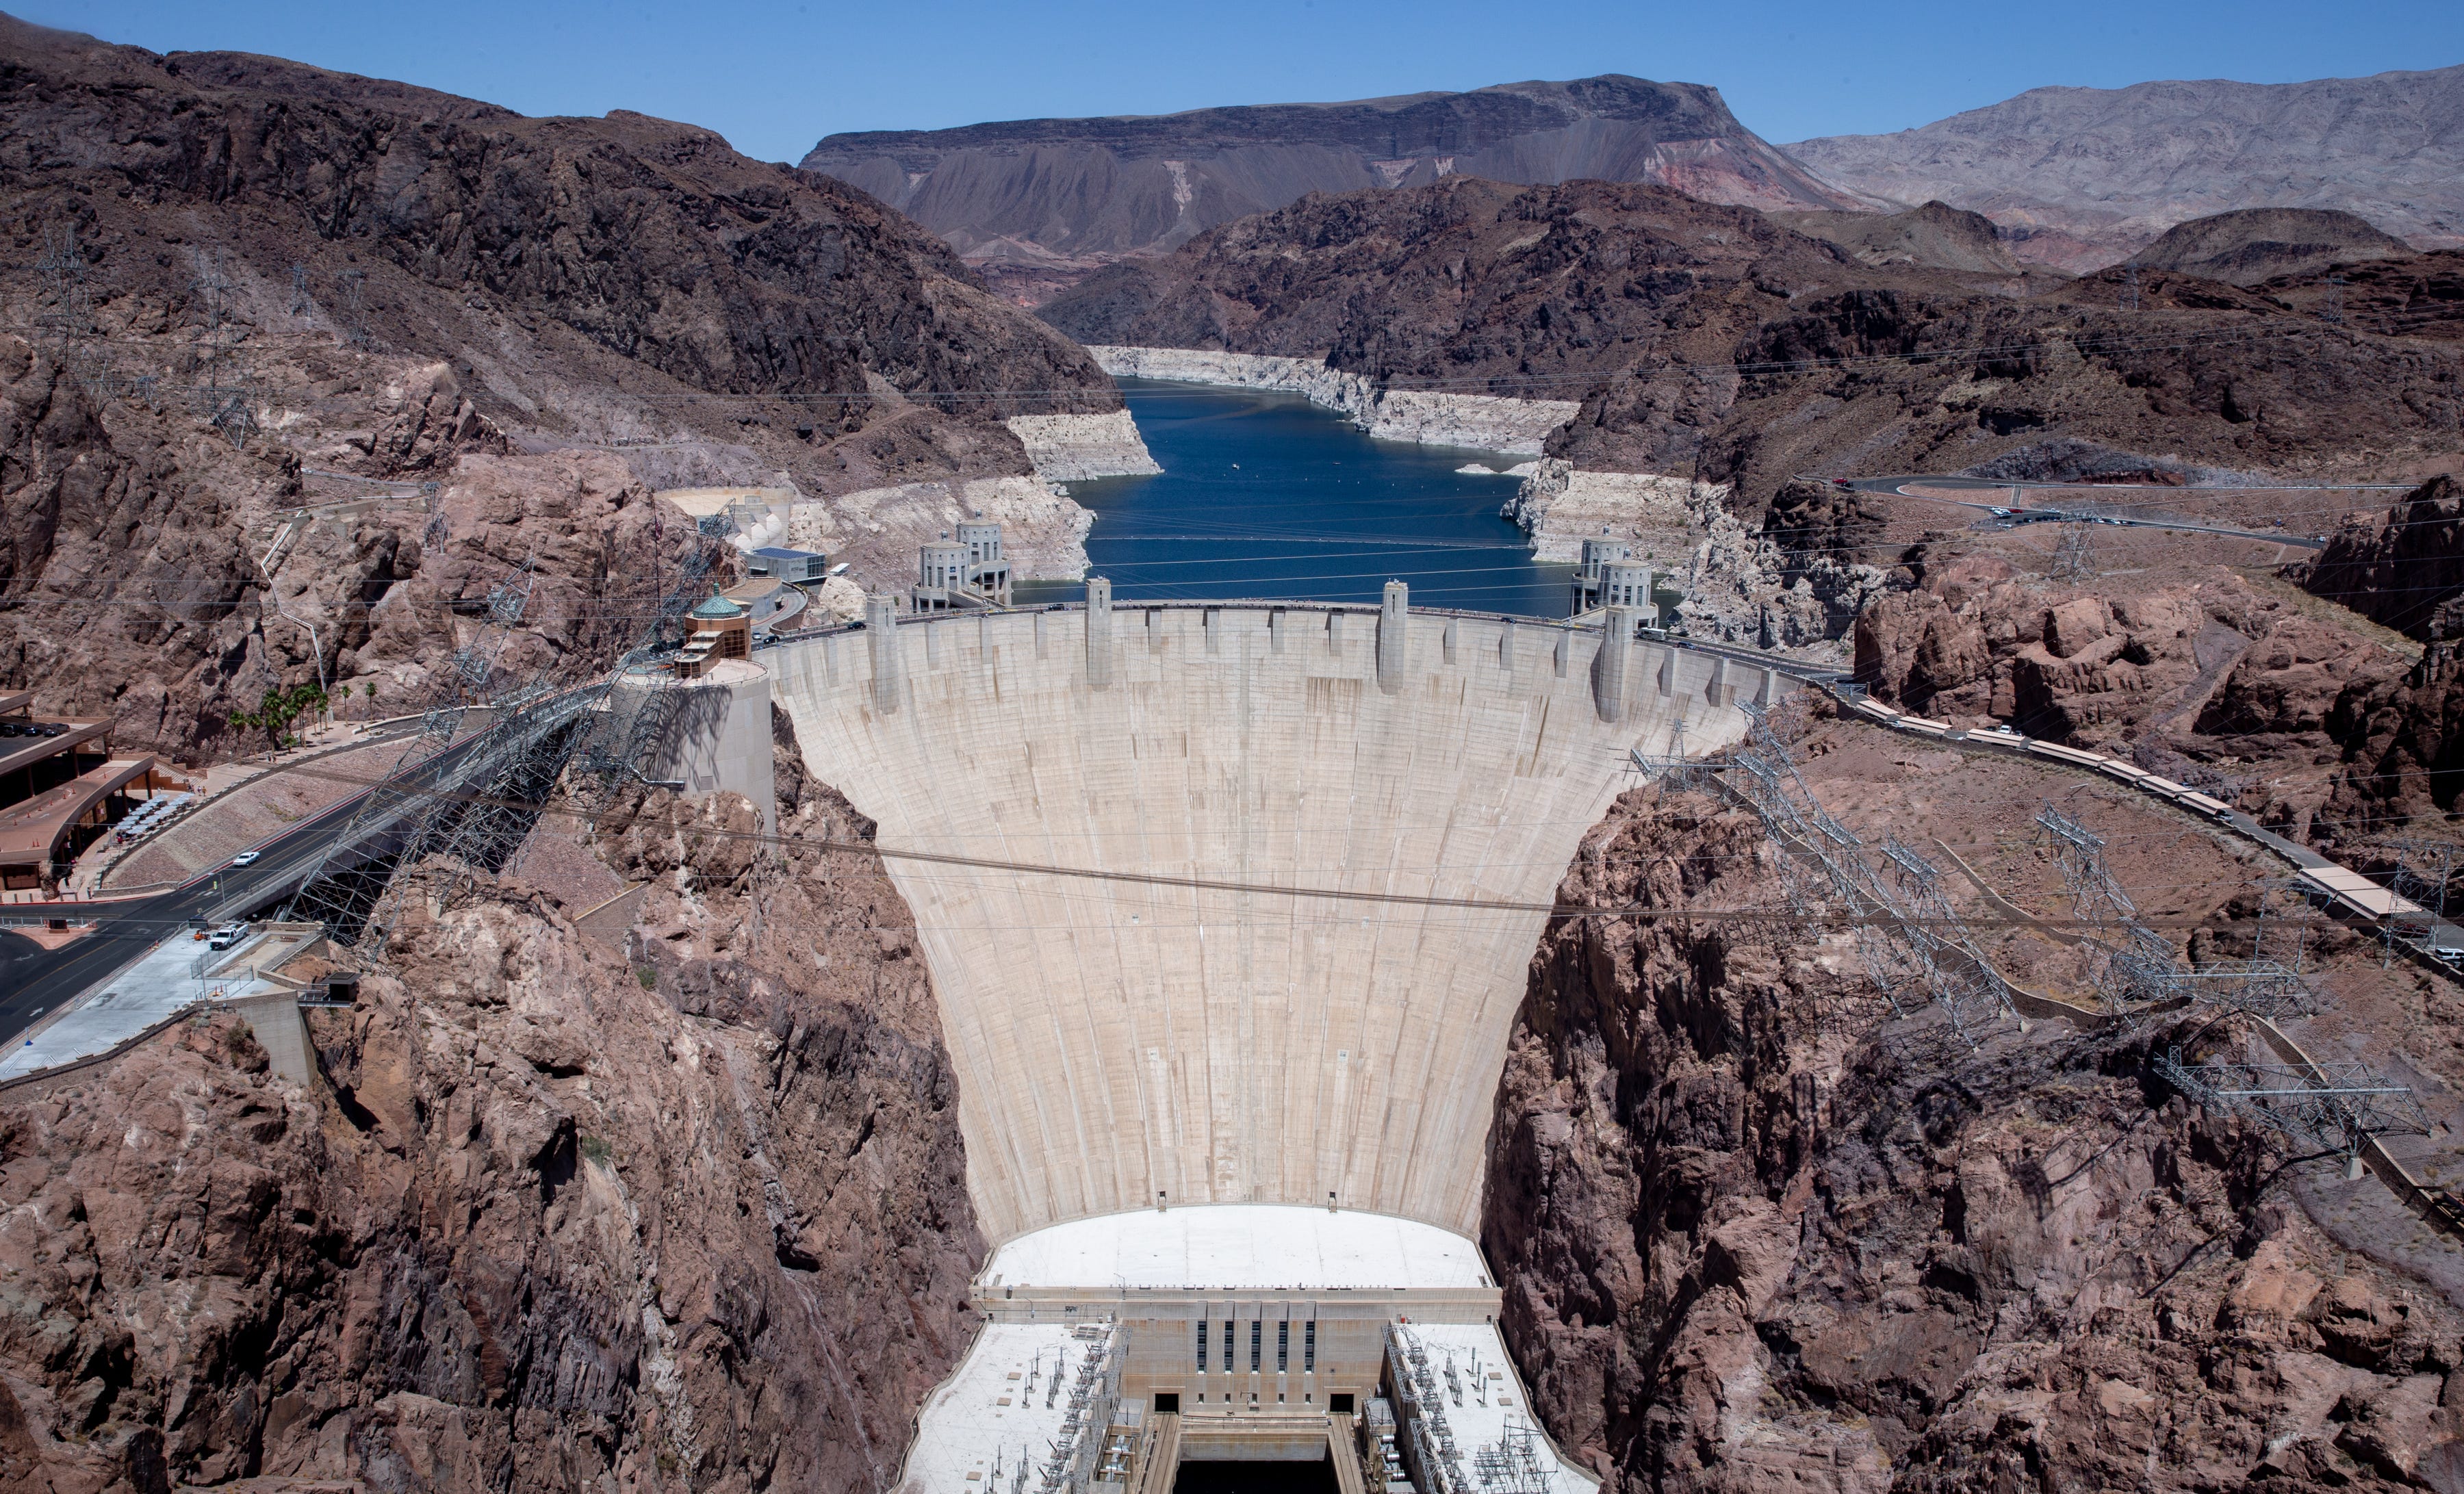 Hoover Dam water shortage Levels decline amid West dryness, droughts